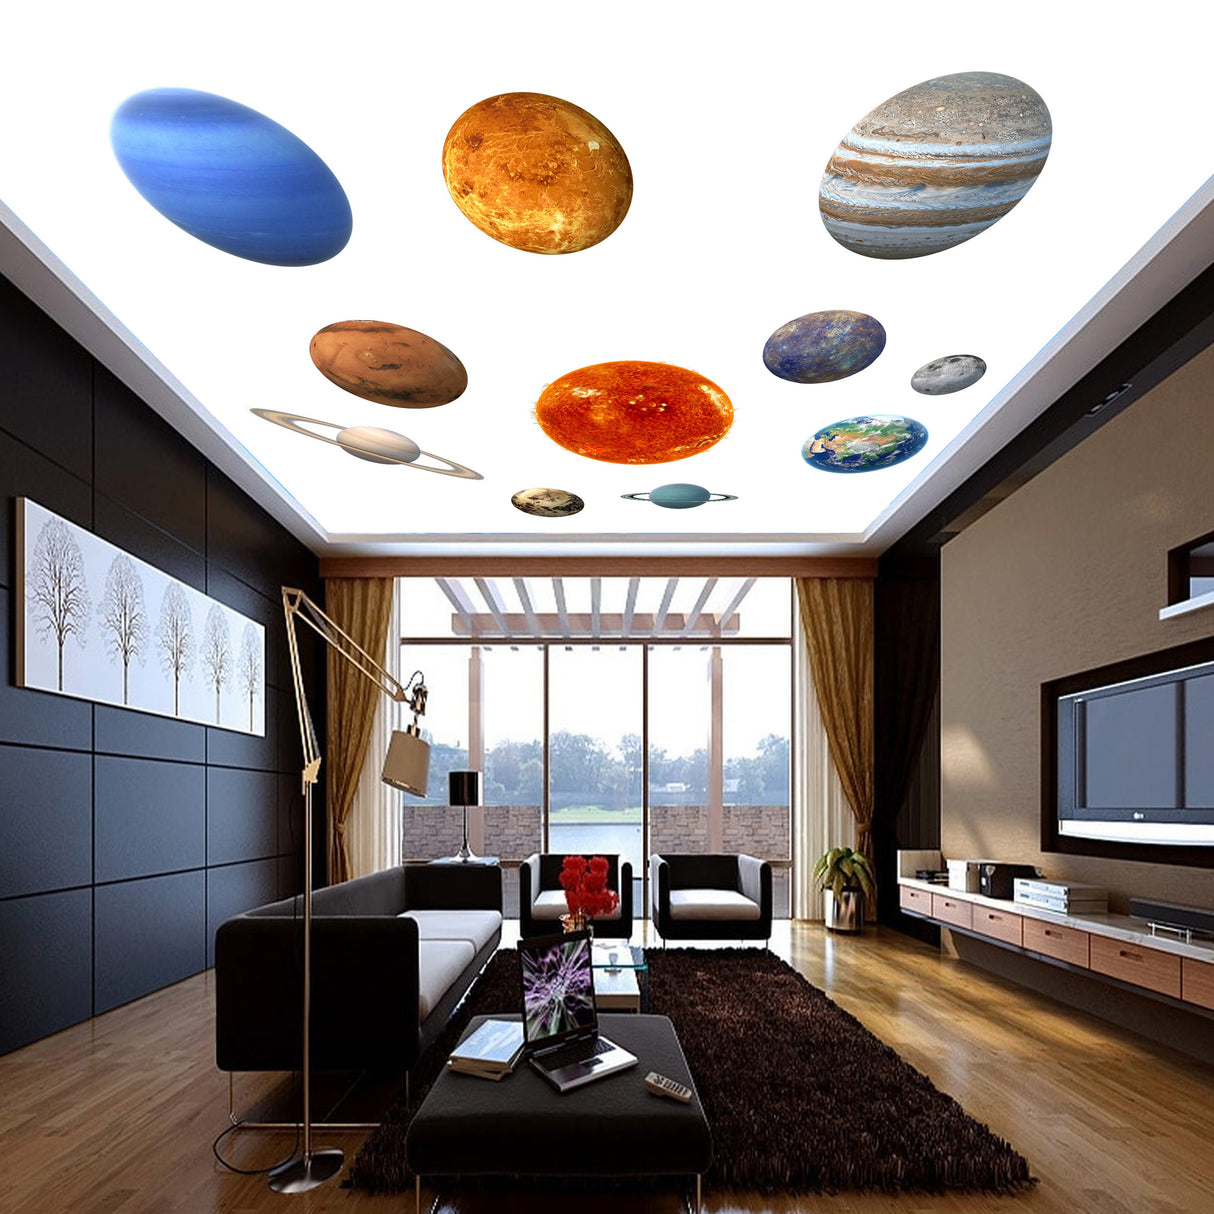 Glow In The Dark Planet Wall Decals - Solar System Glowing Sticker For Ceiling